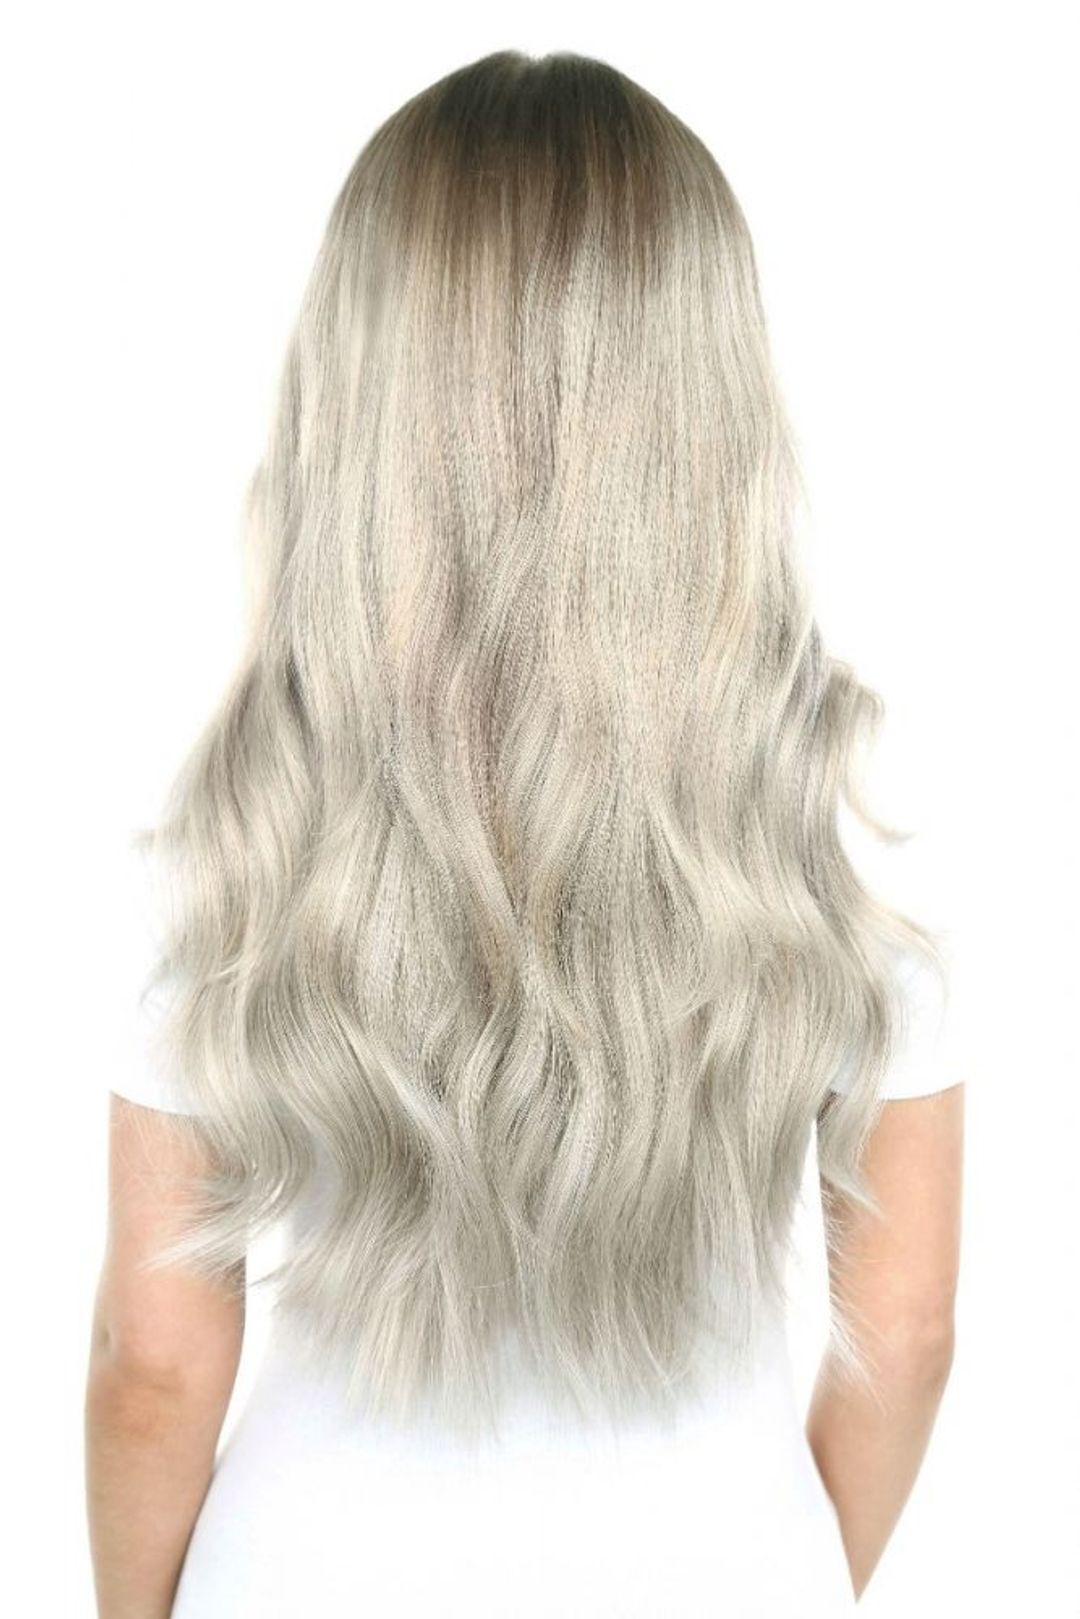 Beauty Works Double Hair Set Clip-In Extensions - Pure Platinum,20"